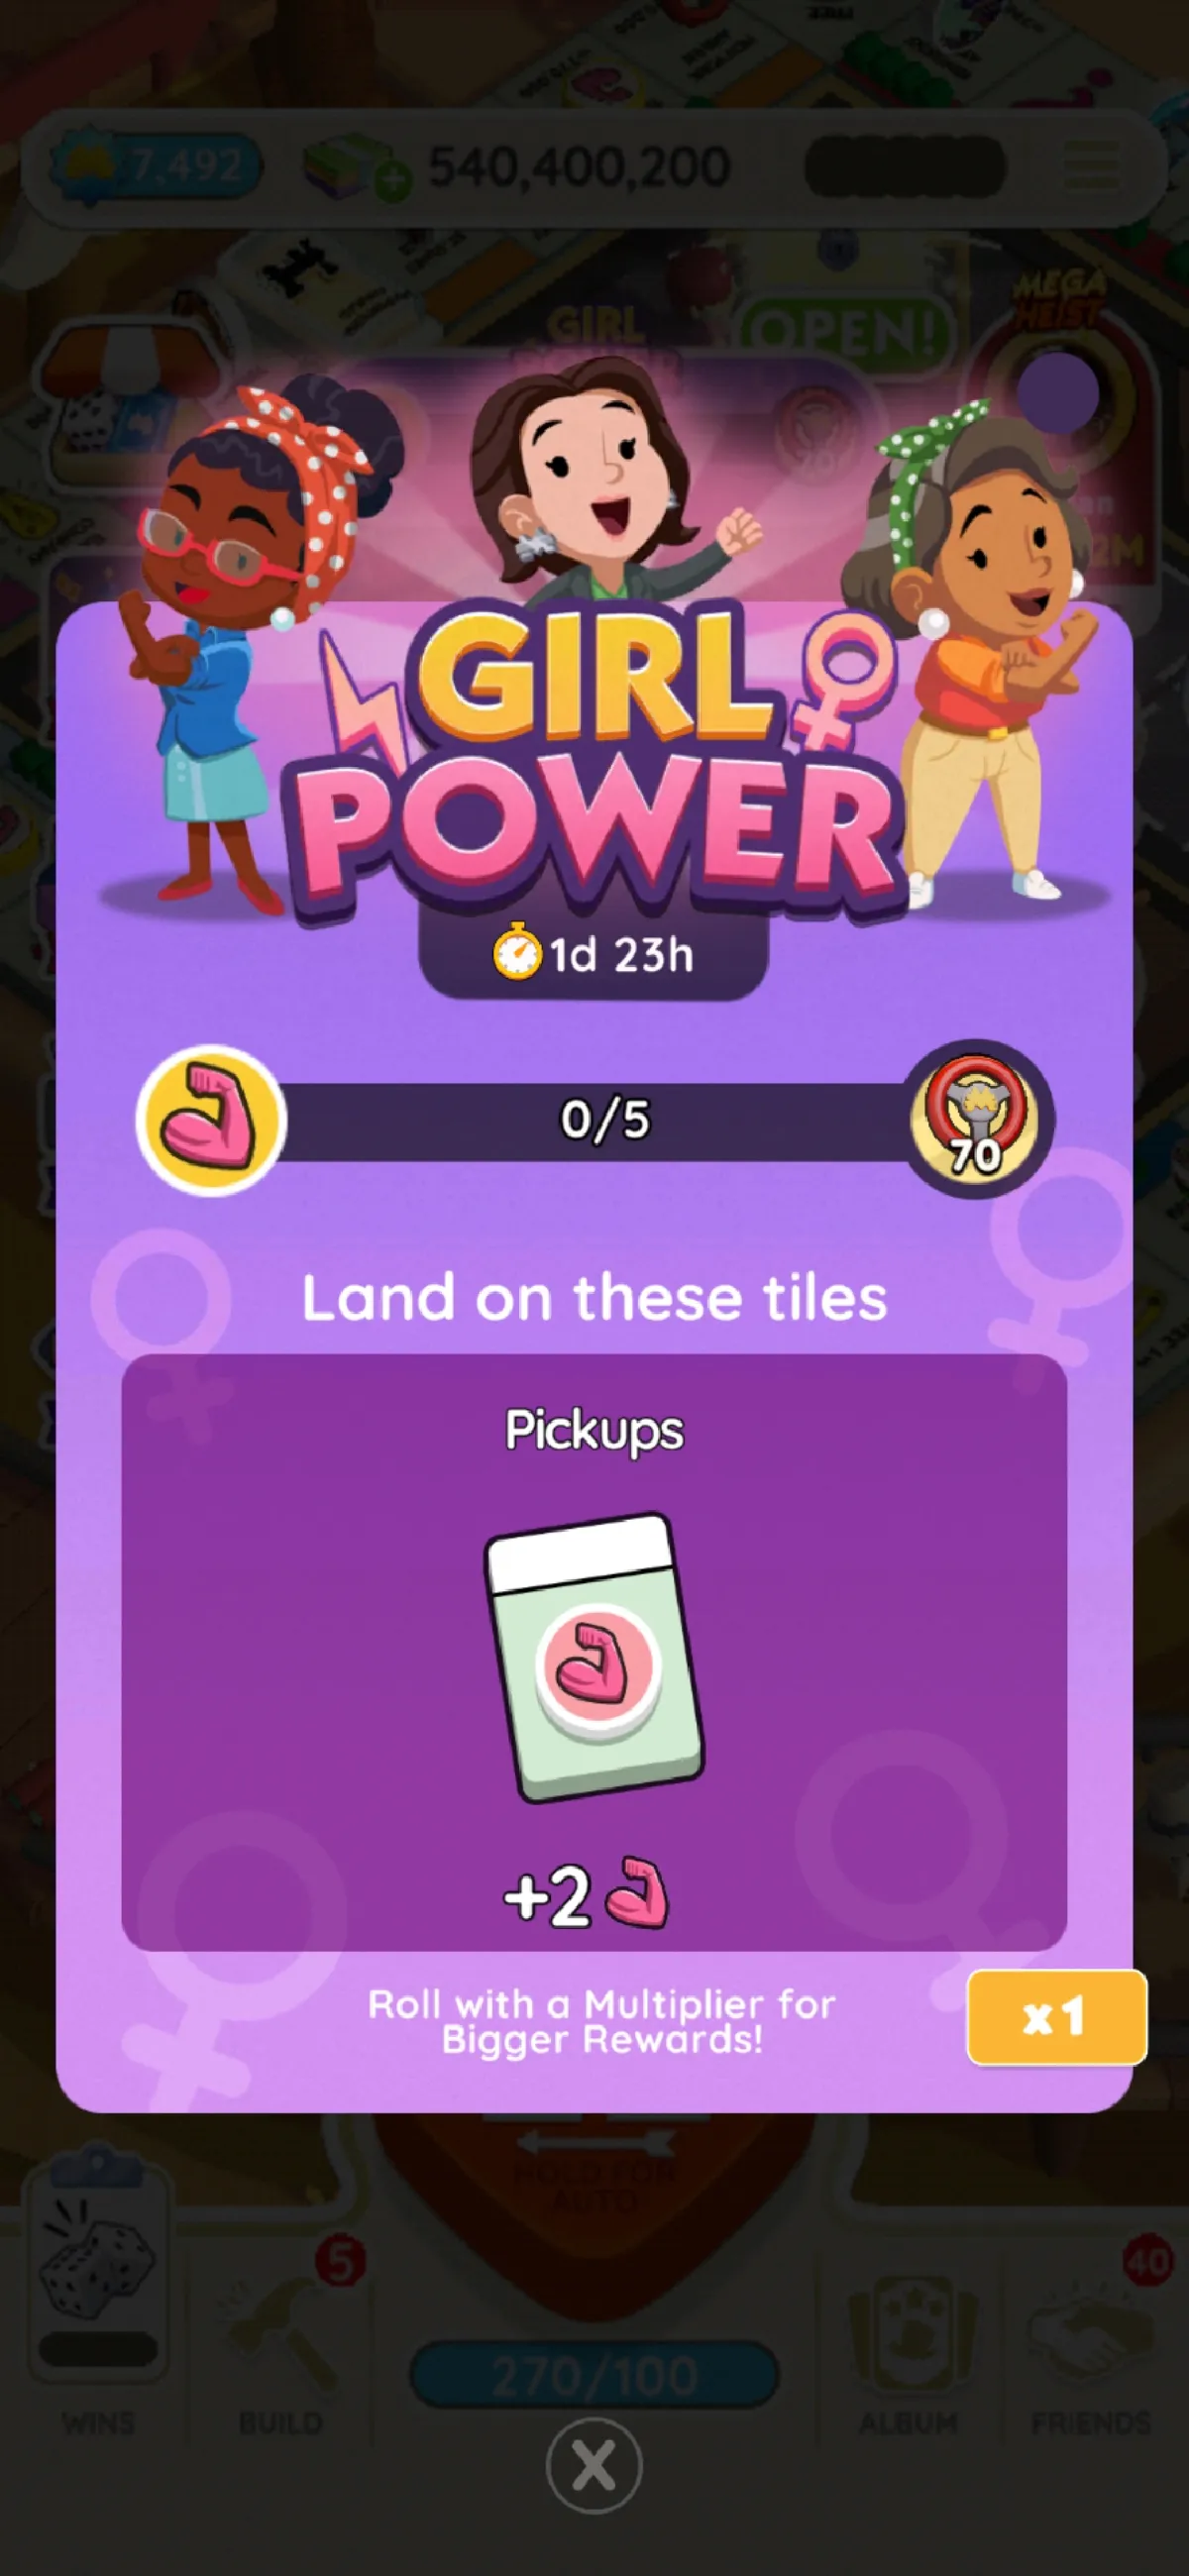 An image of the Girl Power event in Monopoly GO that shows three women standing above the logo for the event. The image is part of an article on all the event rewards and milestones for the Girl Power event in Monopoly GO.